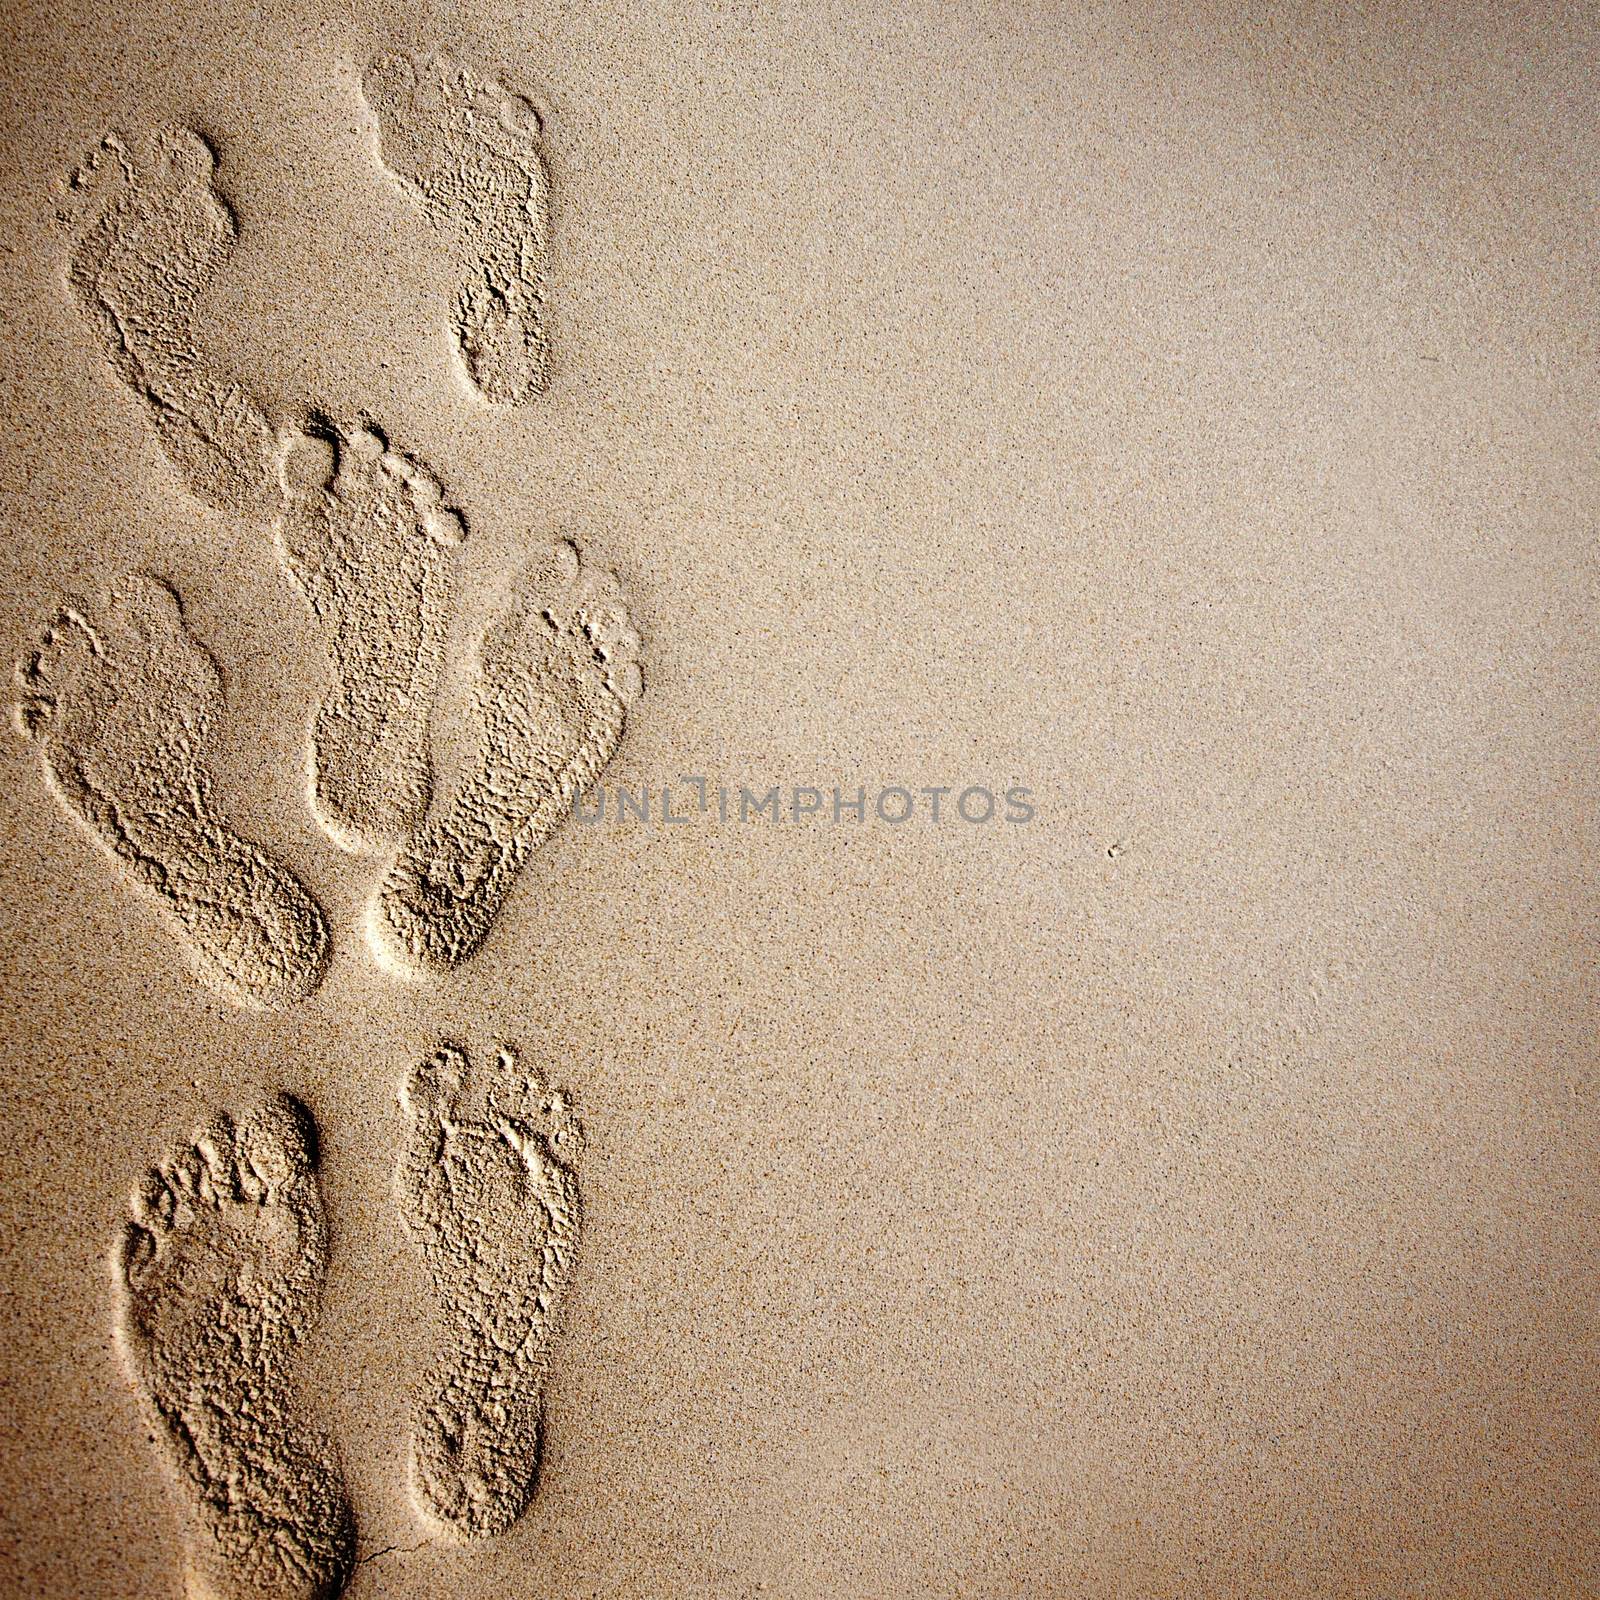 Footprints in the sand by Yellowj